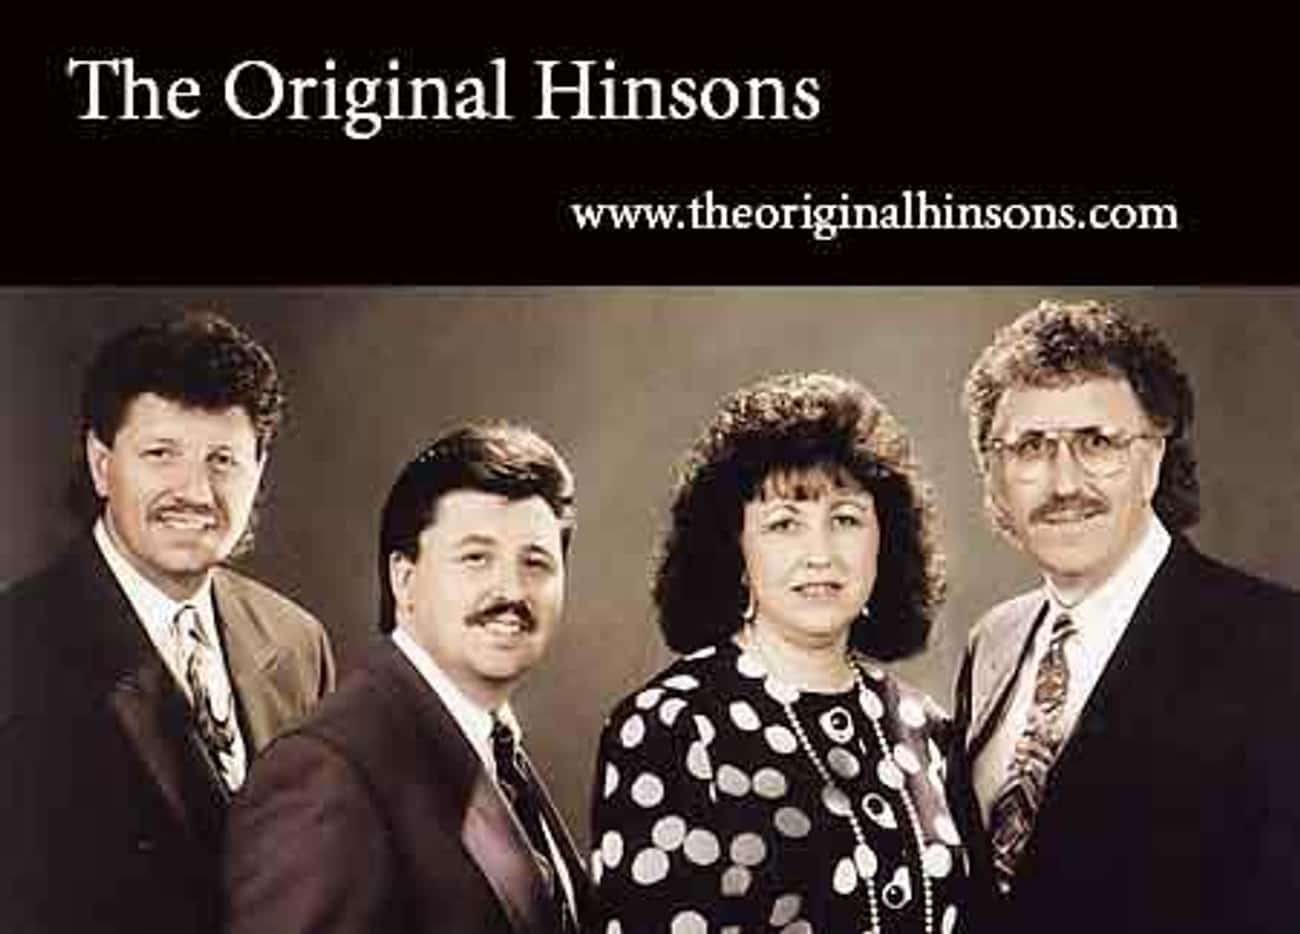 The Hinsons